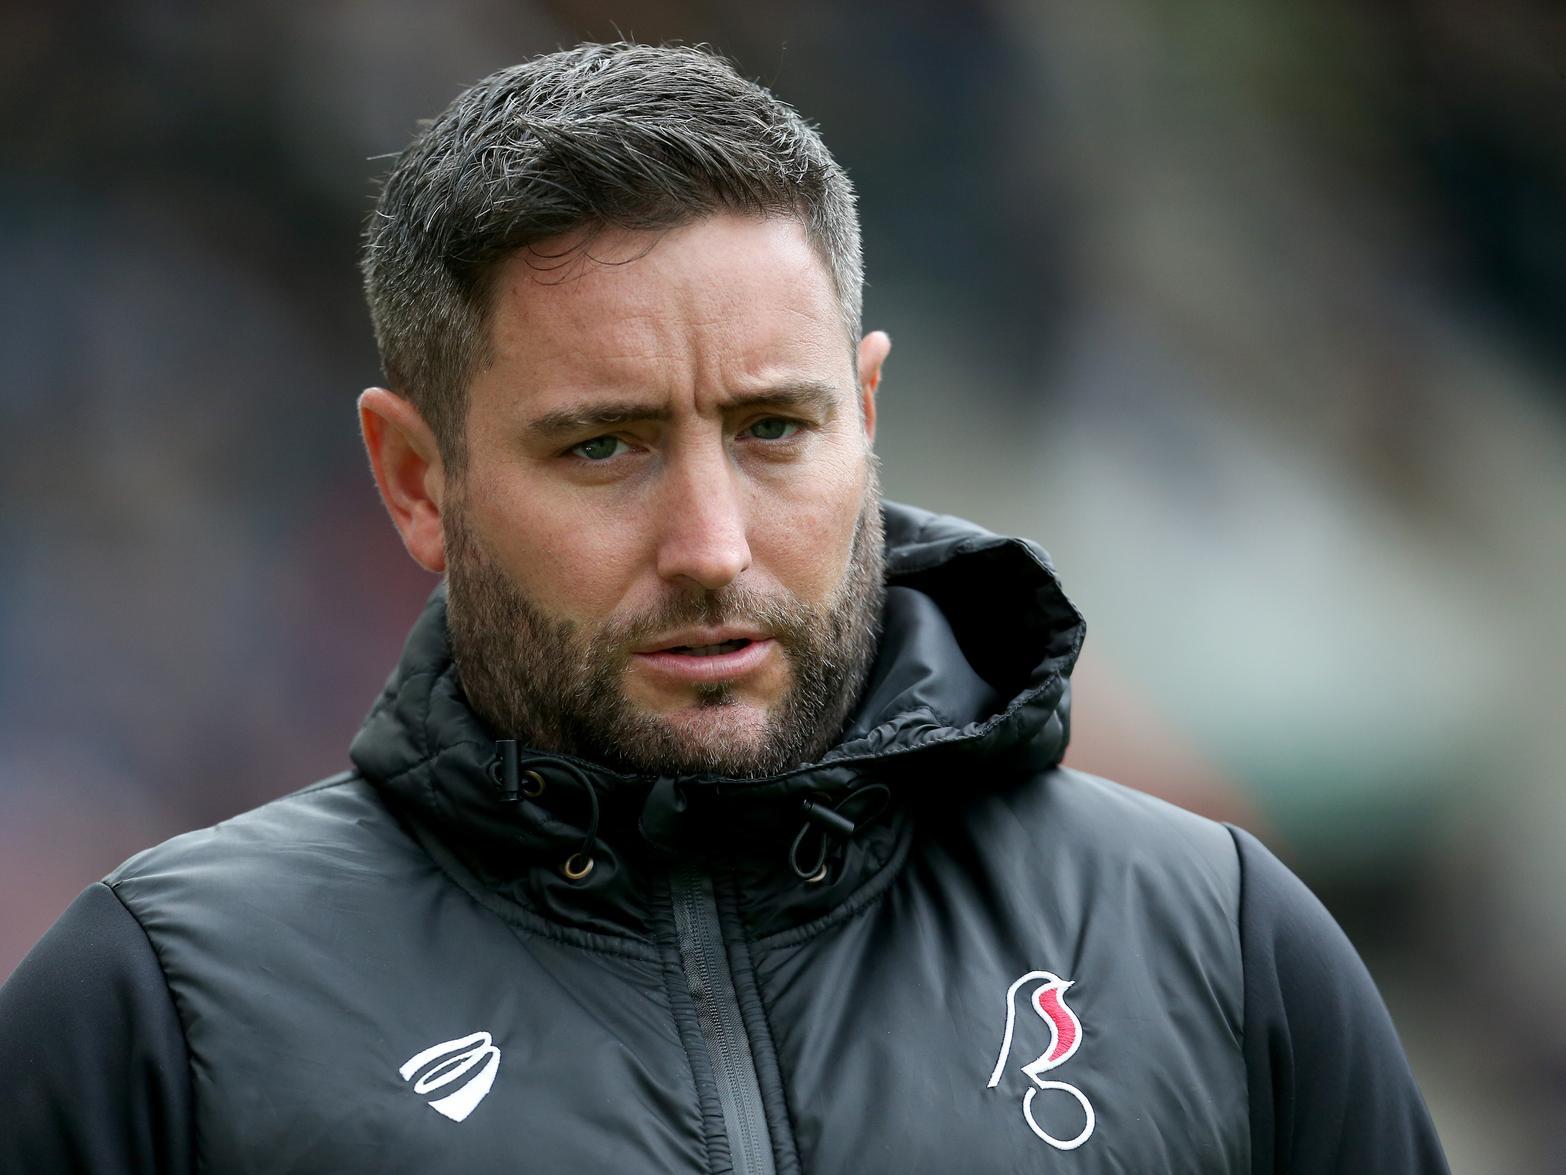 Position: 7th. Points: 54. Points behind Leeds: 14.
Average position of remaining opponents: 11th (11.4).
Pictured: Bristol City boss Lee Johnson. Photo by Lewis Storey/Getty Images.